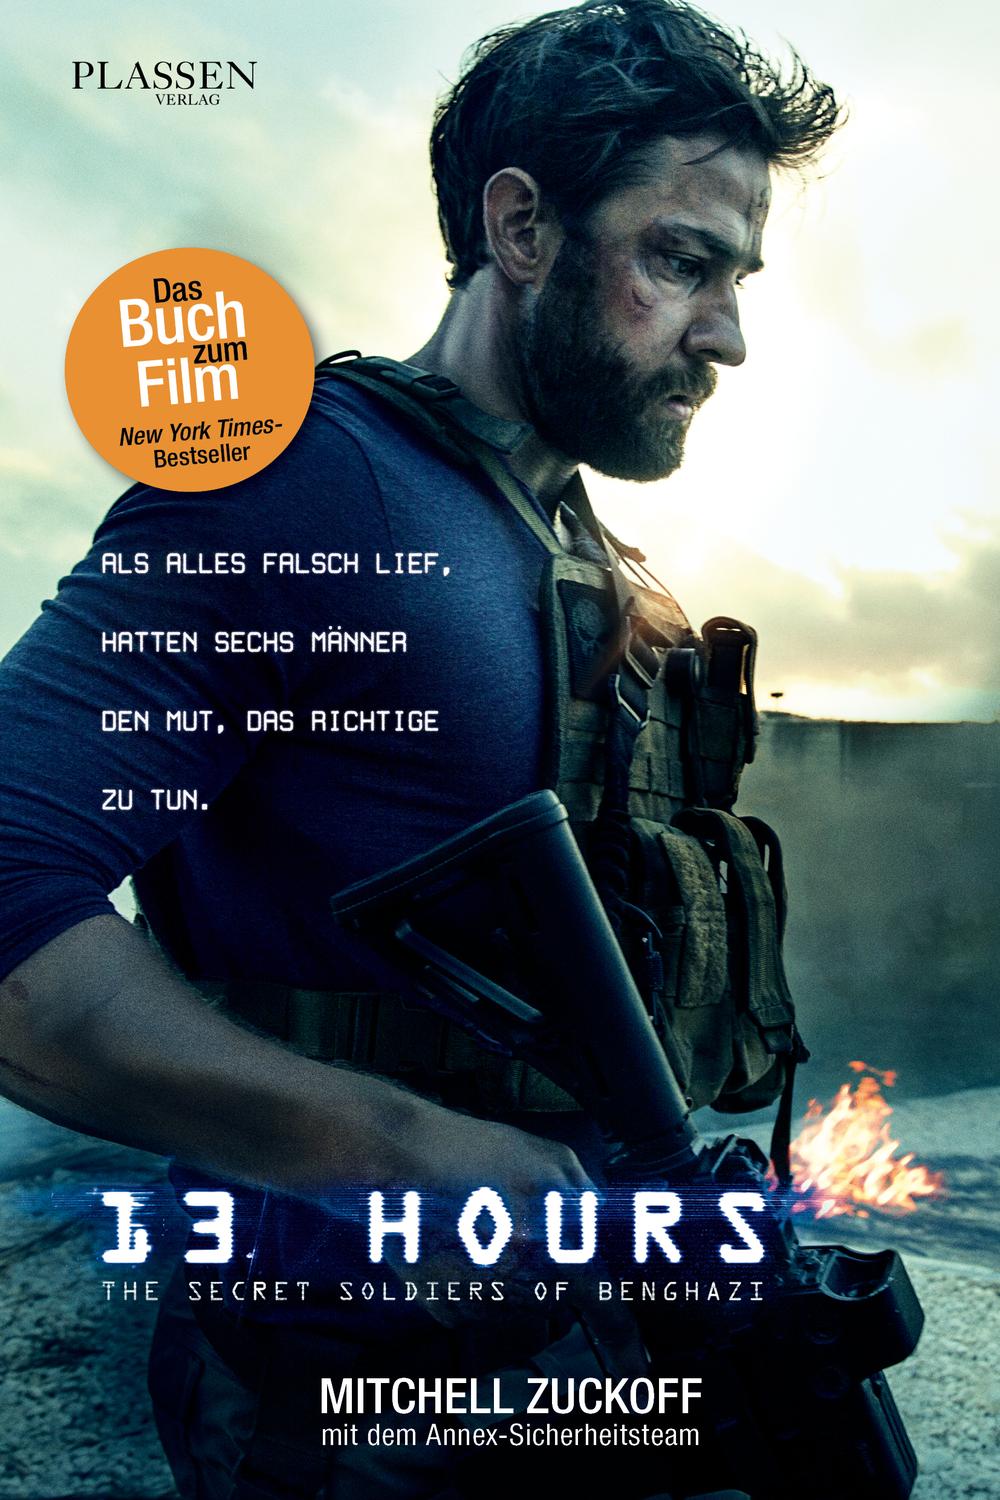 13 hours book pdf free download